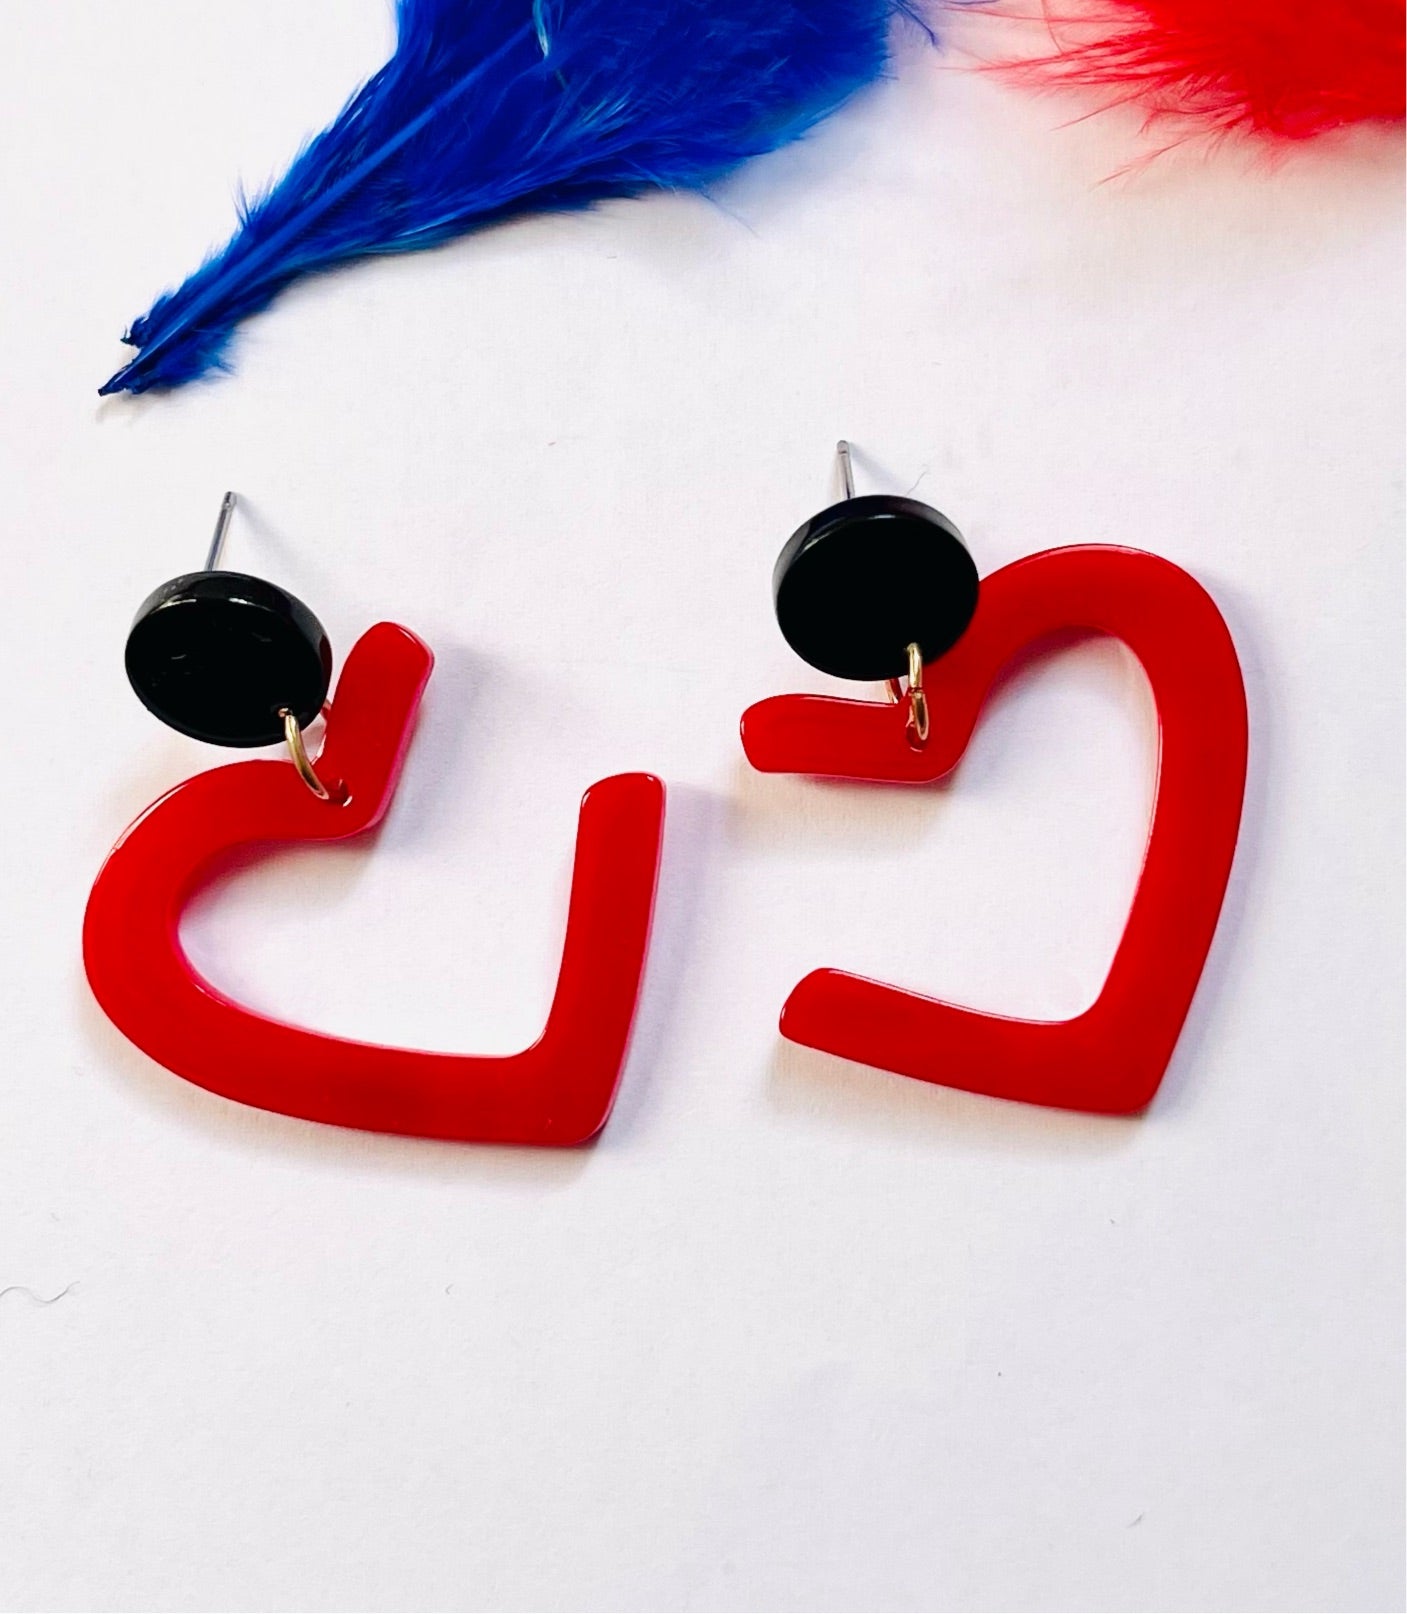 Red heart earrings - Jazz & Milly Clothing#New_ Zealand#